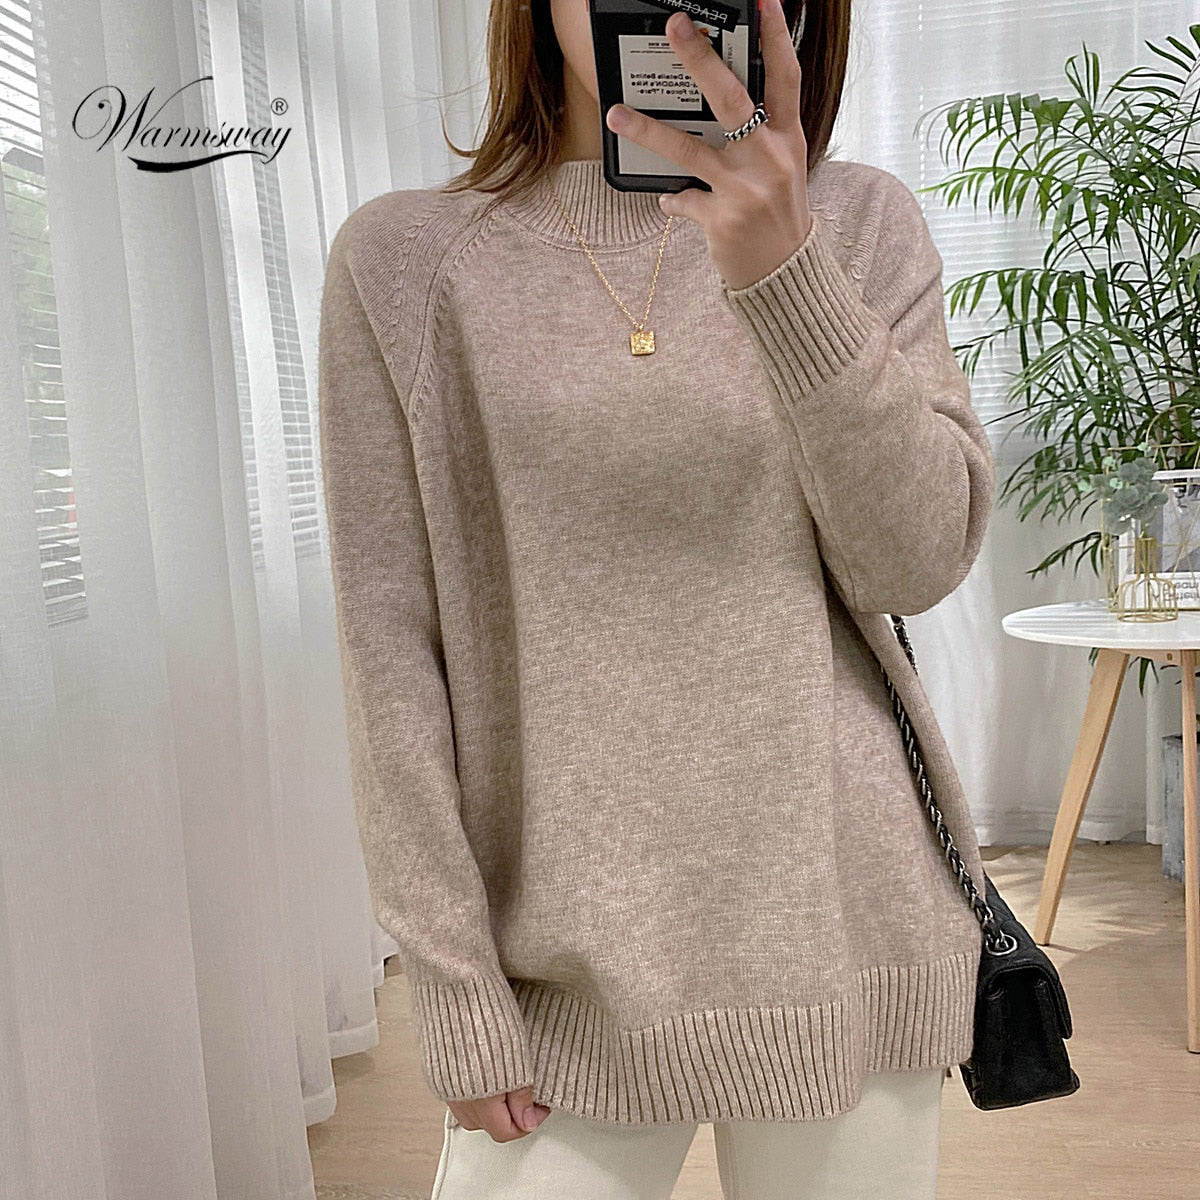 Women Mock Neck Pullovers Sweater High Quality Oversized Jumper Split Fall Winter Clothes Beige Purple Green 8 Colors  C-232